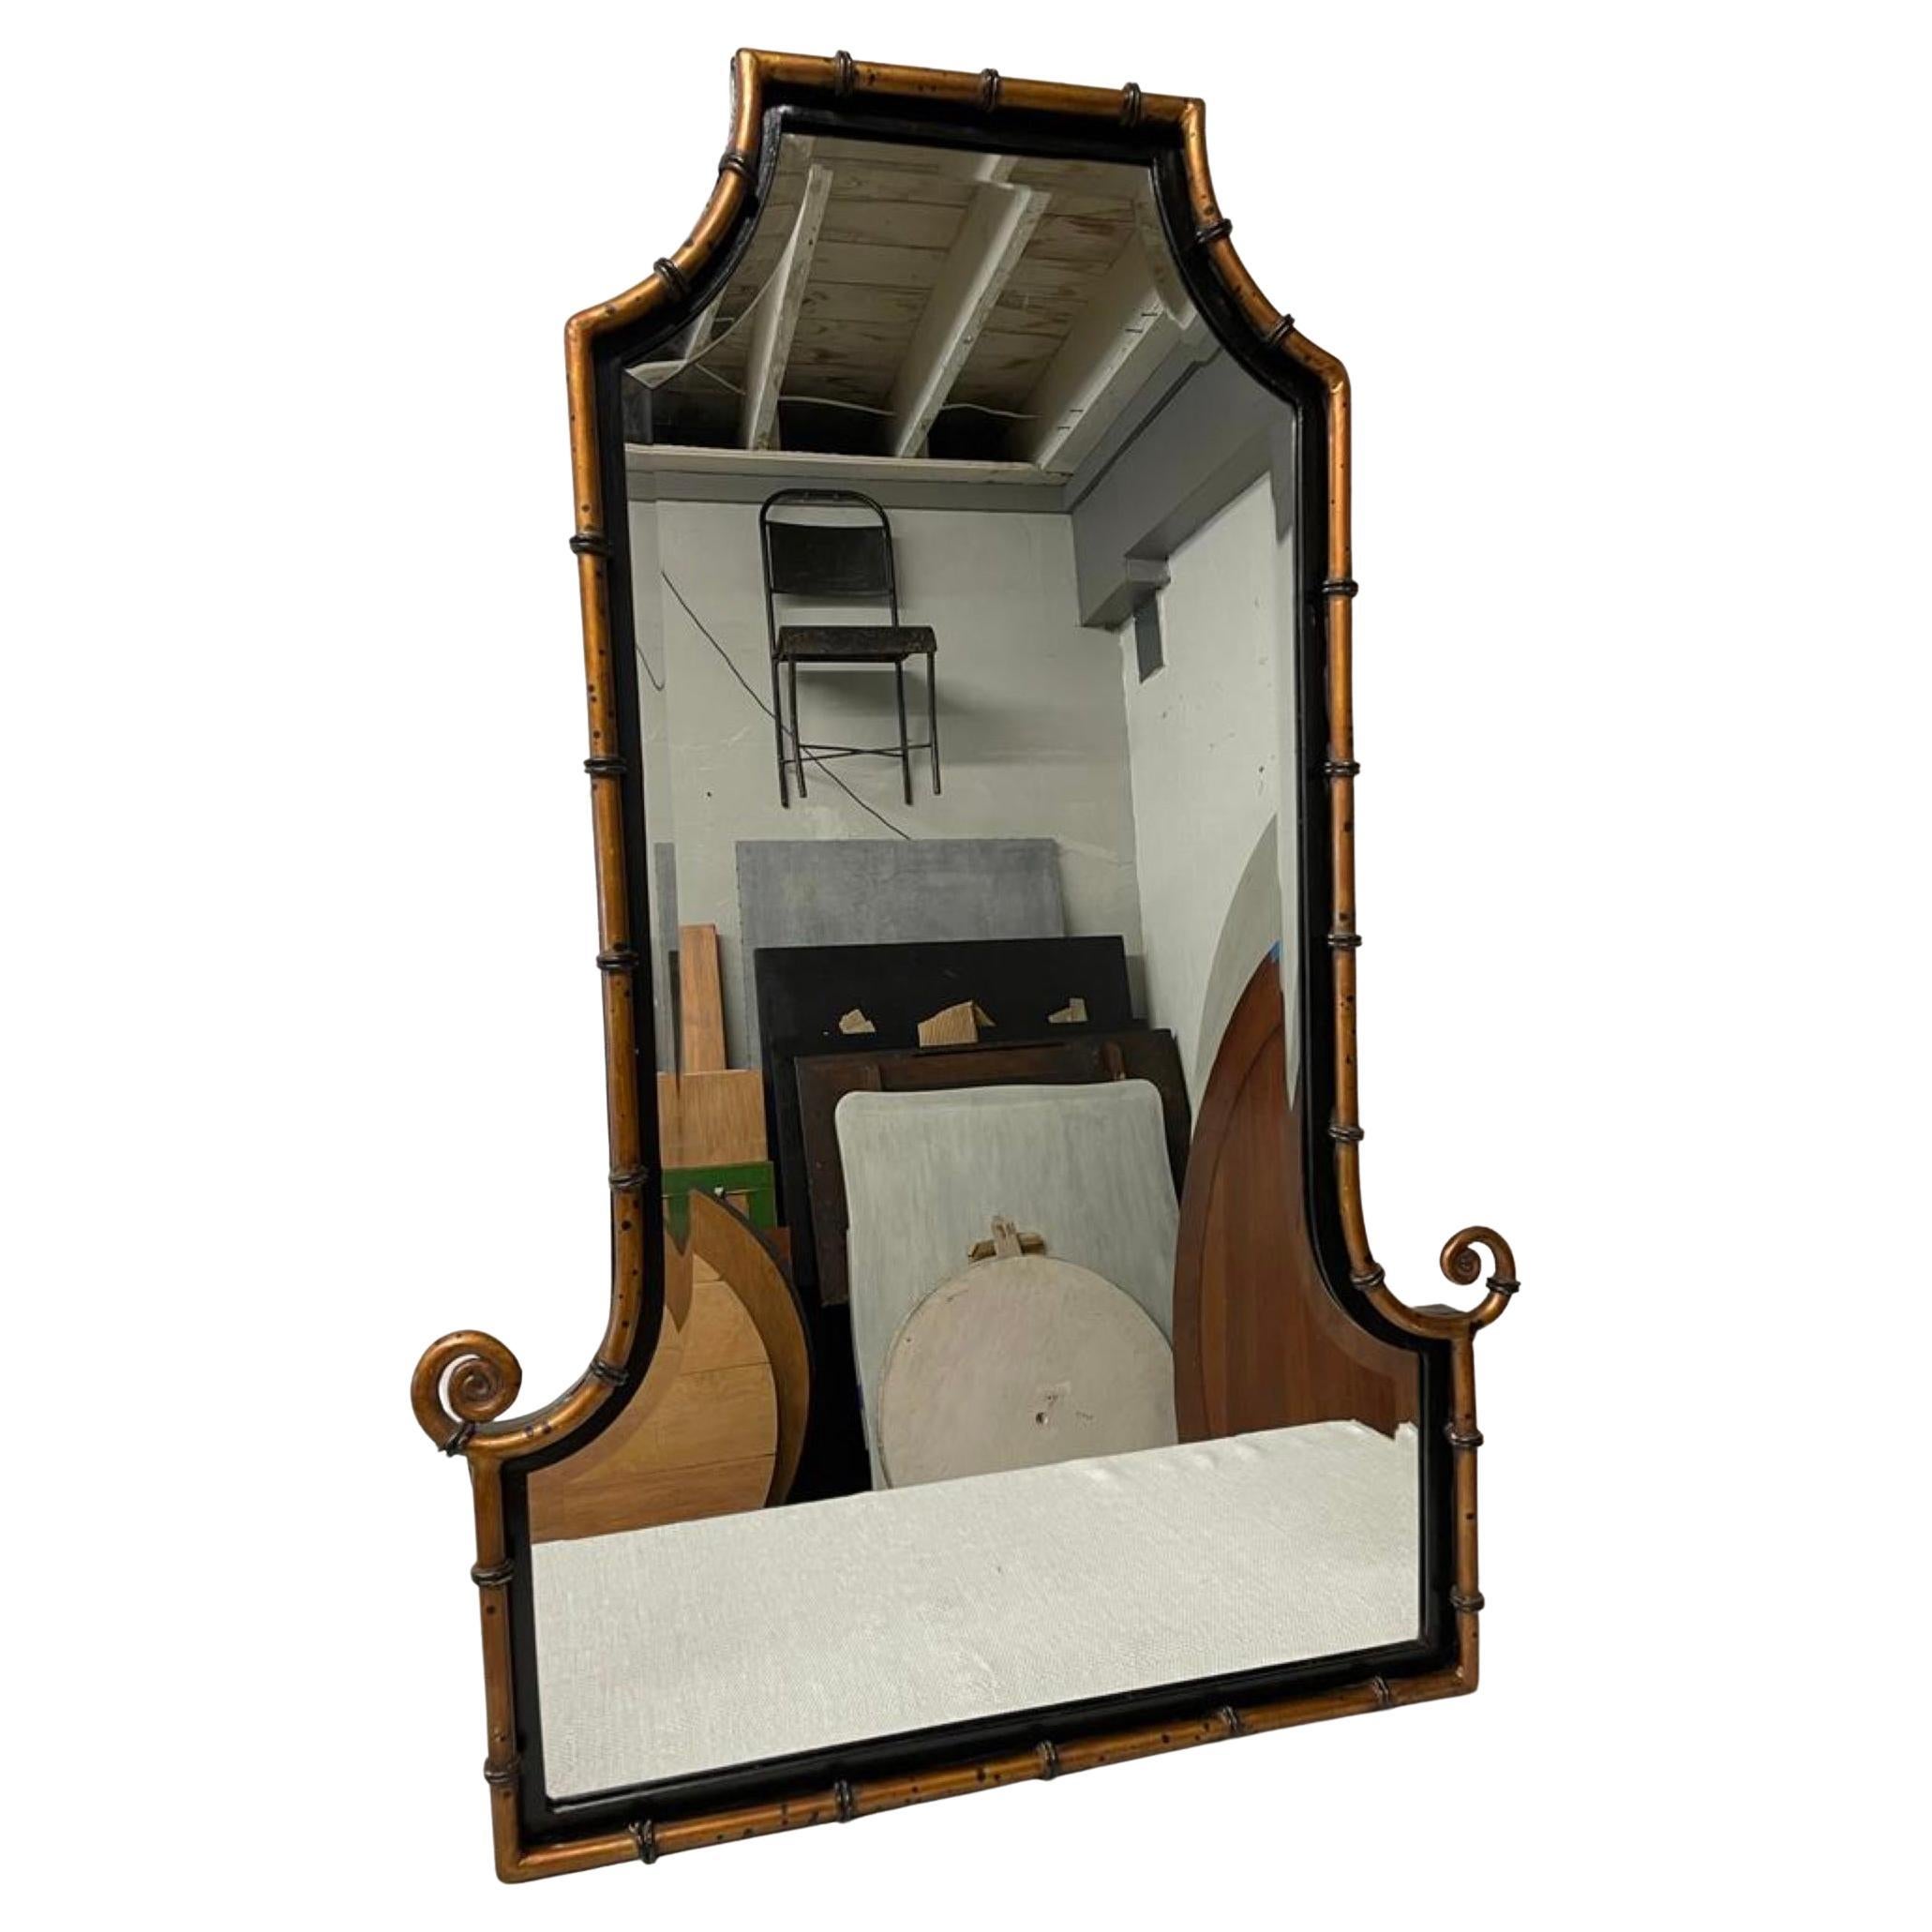 Chinoiserie Style Pagoda Form Faux Bamboo  Mirror with wrought iron painted faux bamboo detail surrounding the center beveled  mirror. 
Wall mirror, mantel mirror, dresser mirror, entry foyer mirror, dresser mirror, hall mirror.